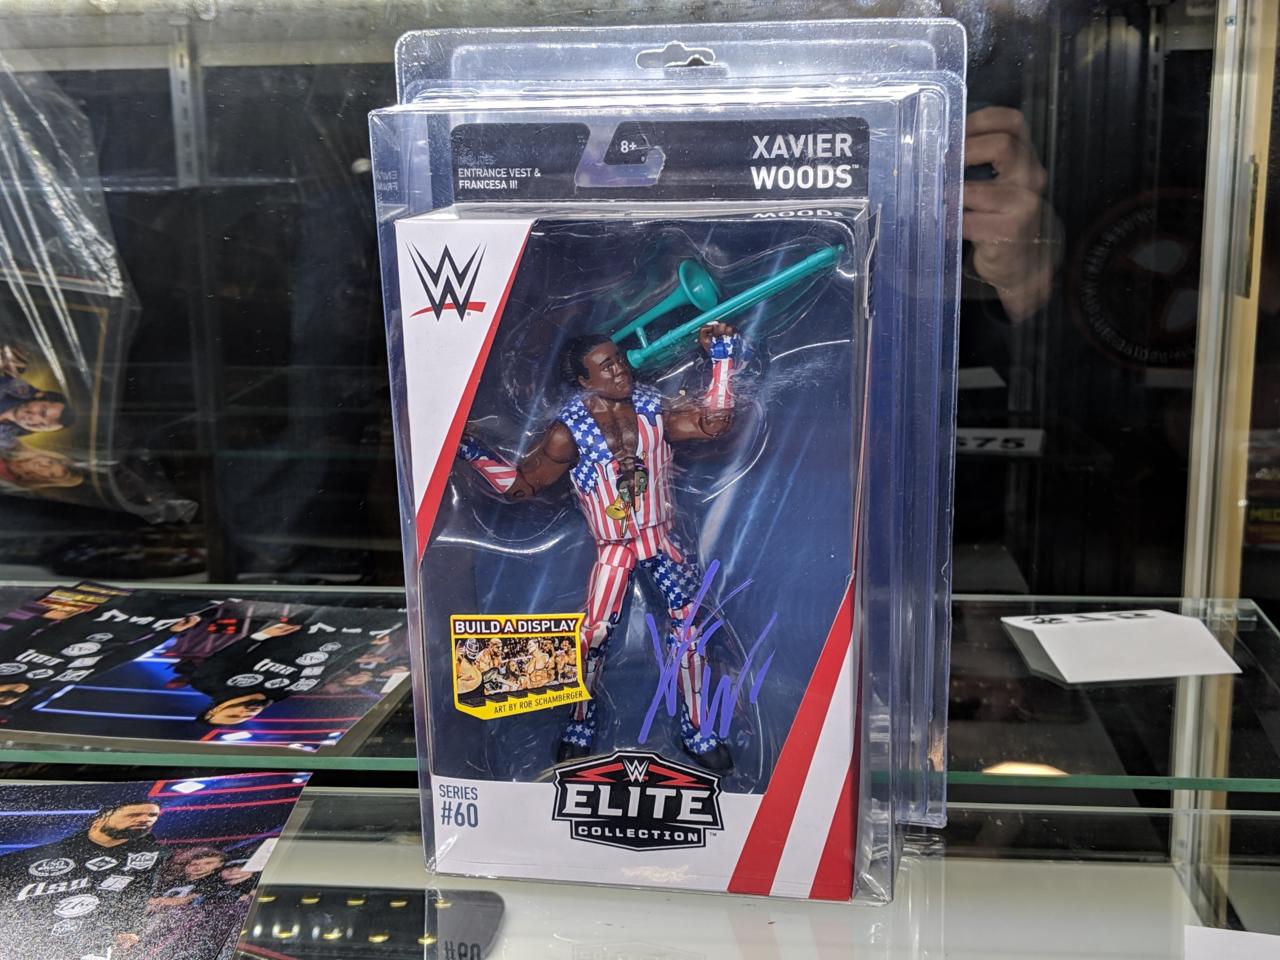 18. Signed items, including this Xavier Woods action figure